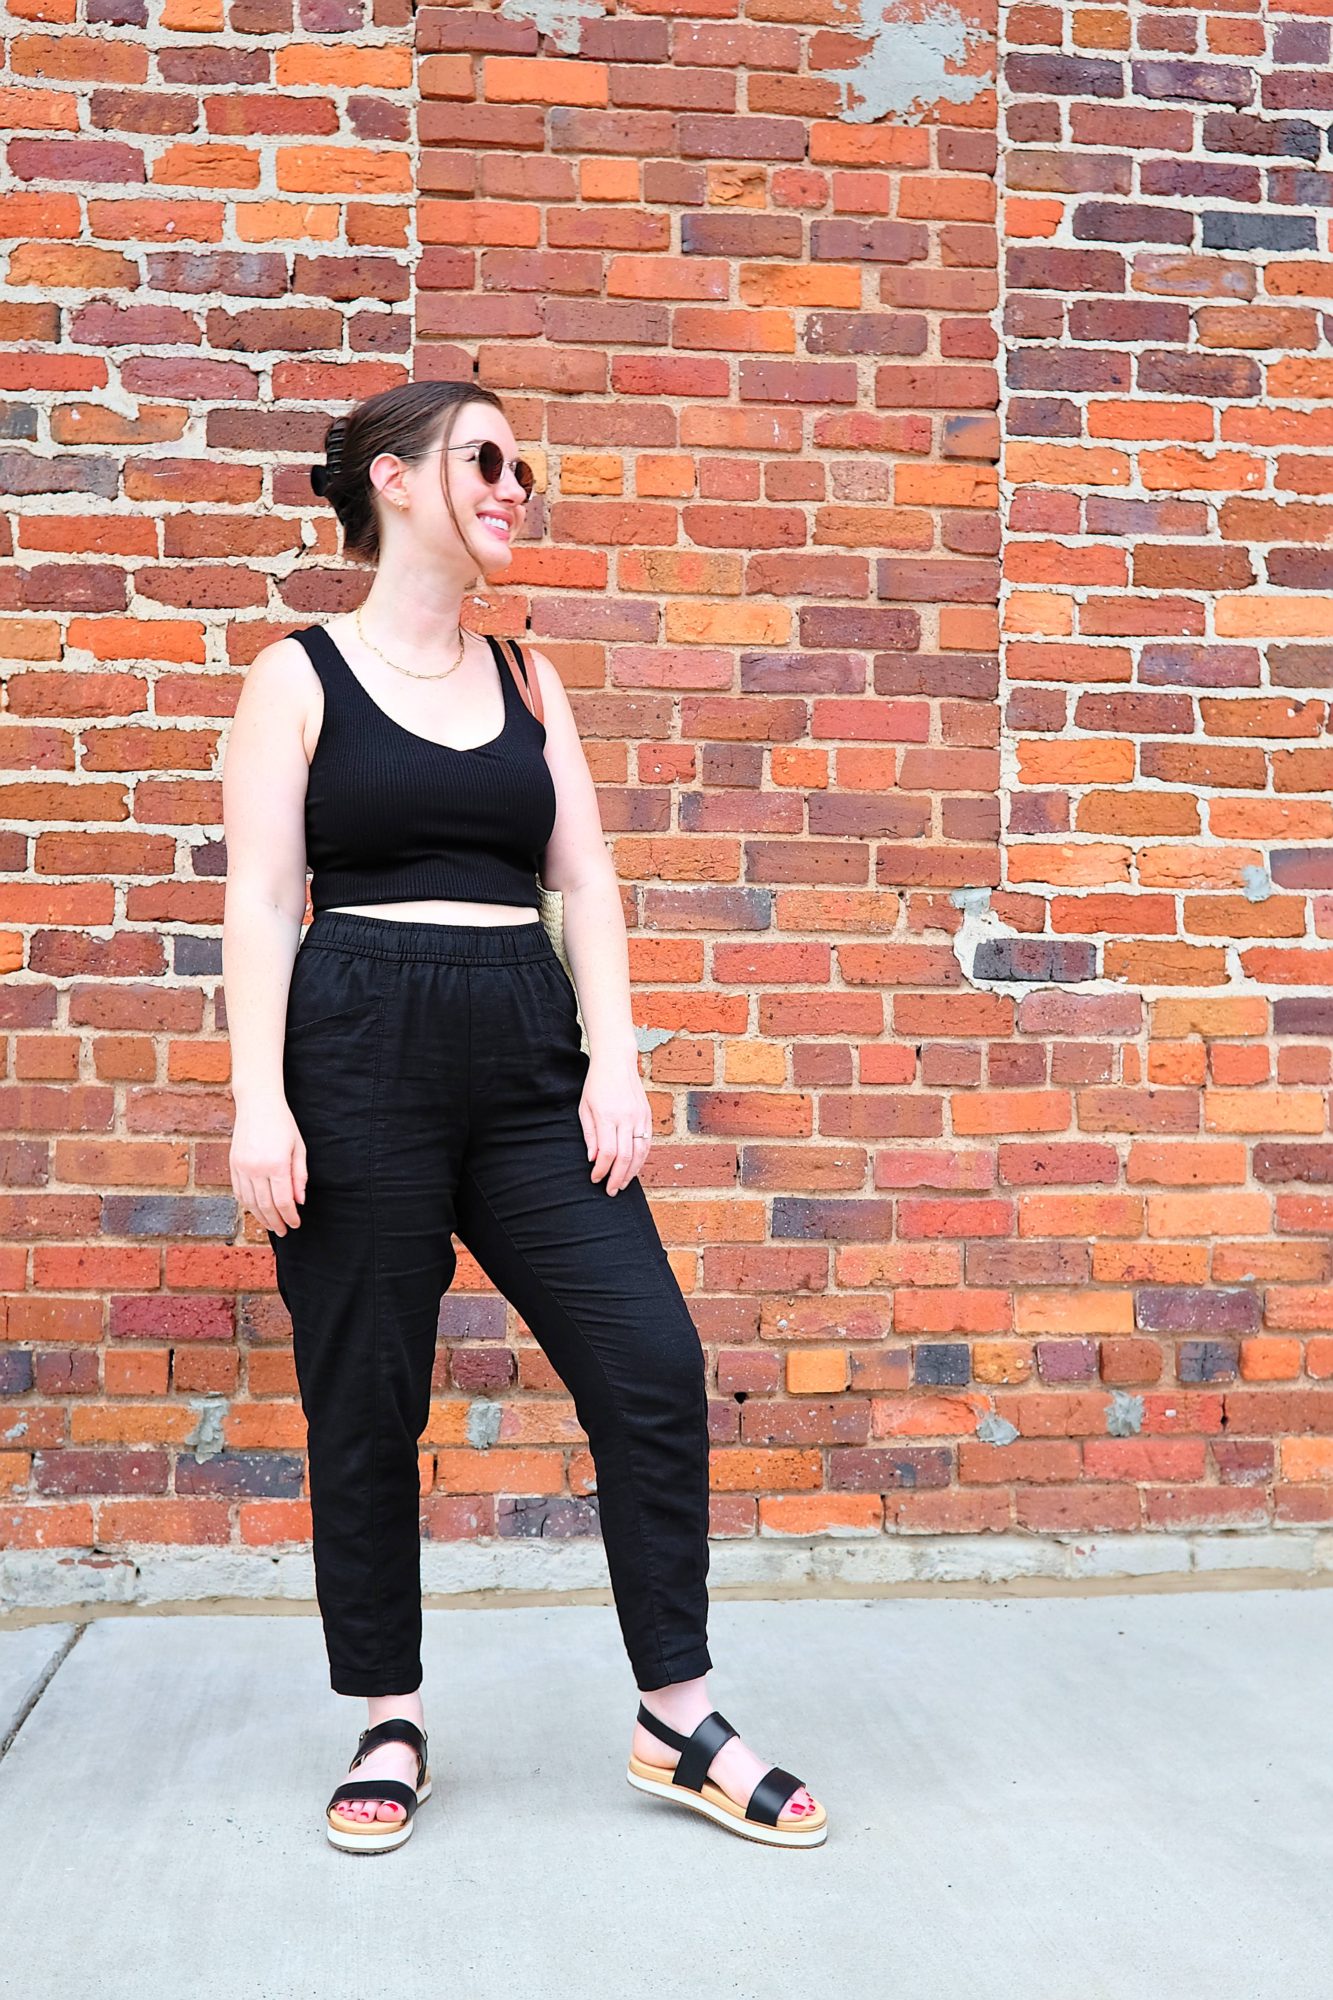 Alyssa stands by a brick wall wearing flatform sandals and linen pants